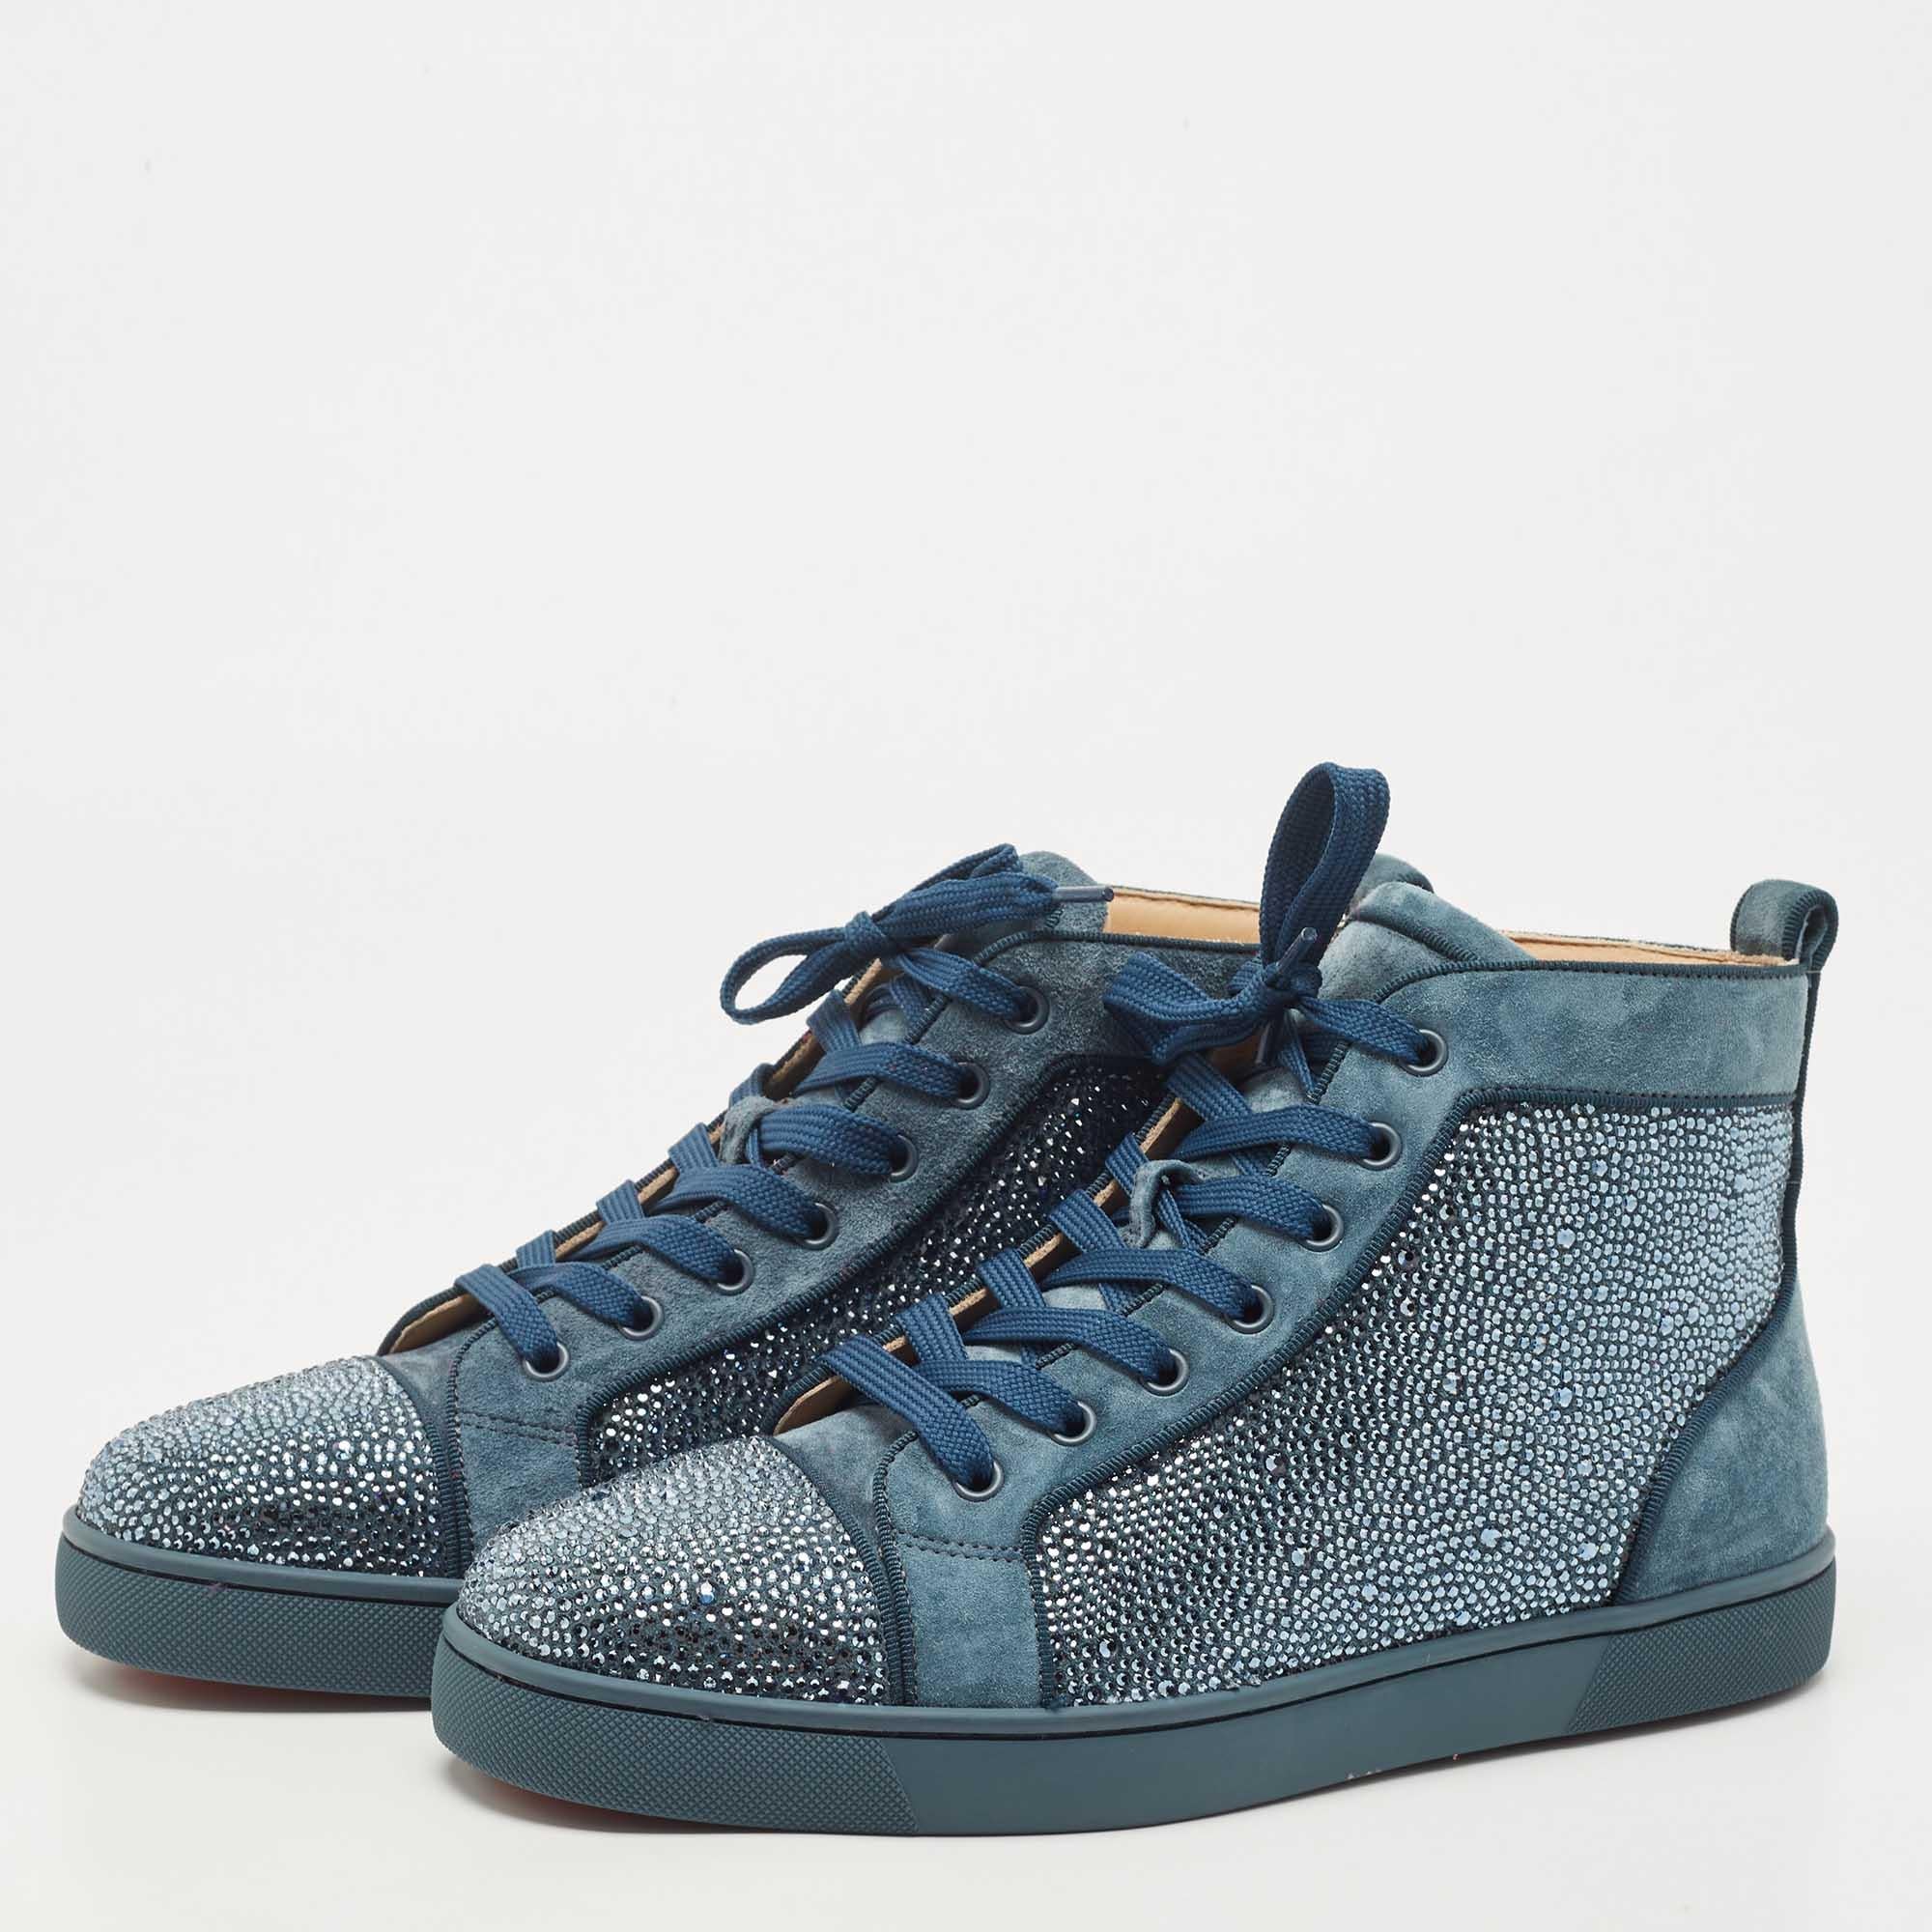 Christian Louboutin Grey Suede Louis Strass High Top Sneakers Size 41 4